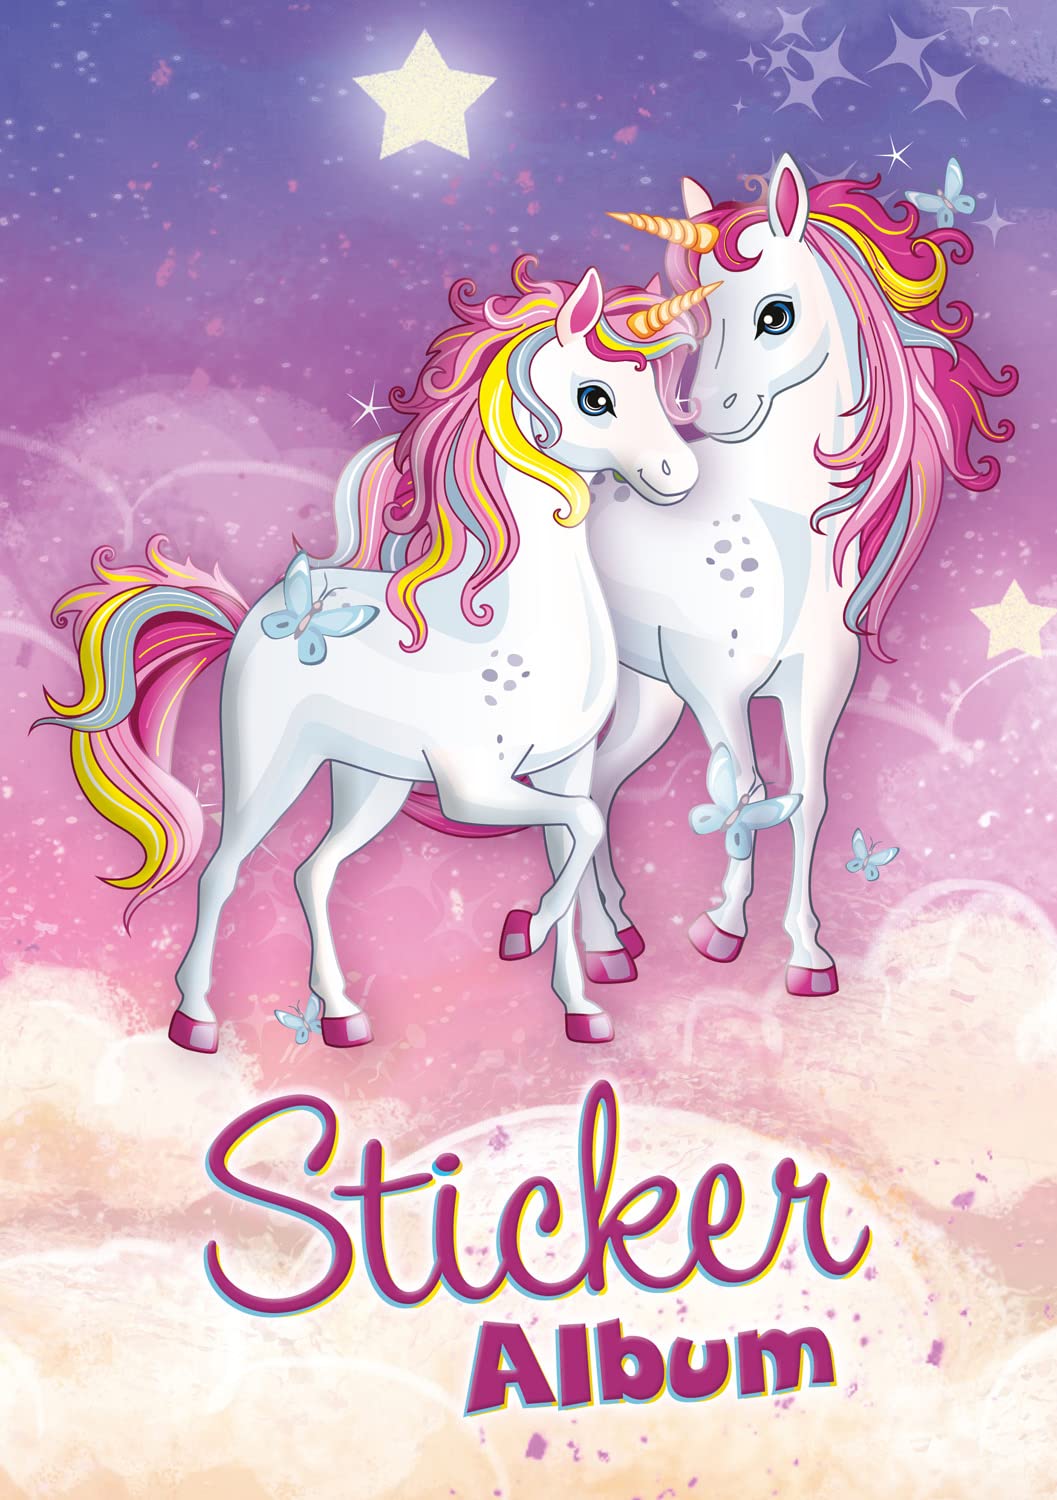 HERMA 15425 Sticker Album Unicorn DIN A5 Blank (16 Pages, Coated Special Paper) Sticker Scrapbook for Collecting, 1 Sticker Book for Girls, Blank